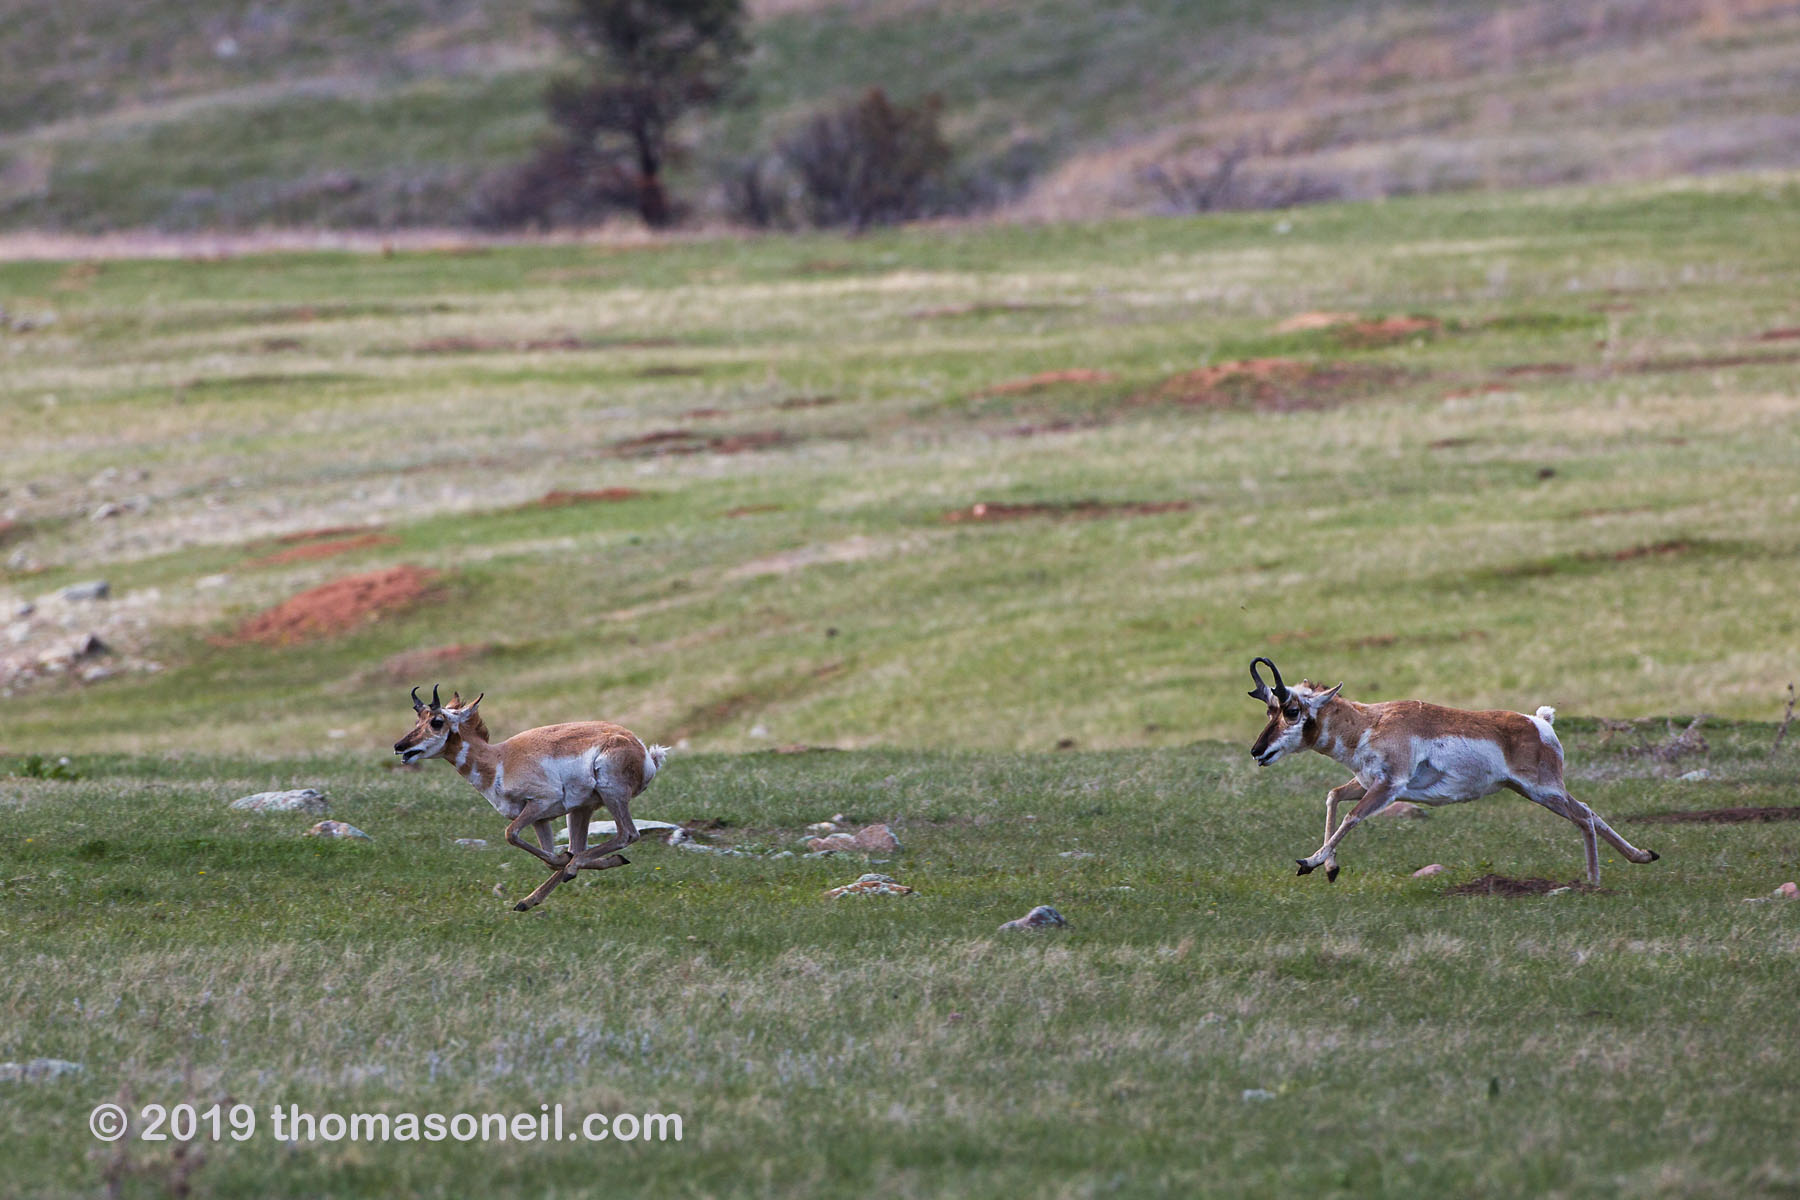 The old pronghorn buck chases a member of its herd, Custer State Park, May 2019.  Click for next photo.